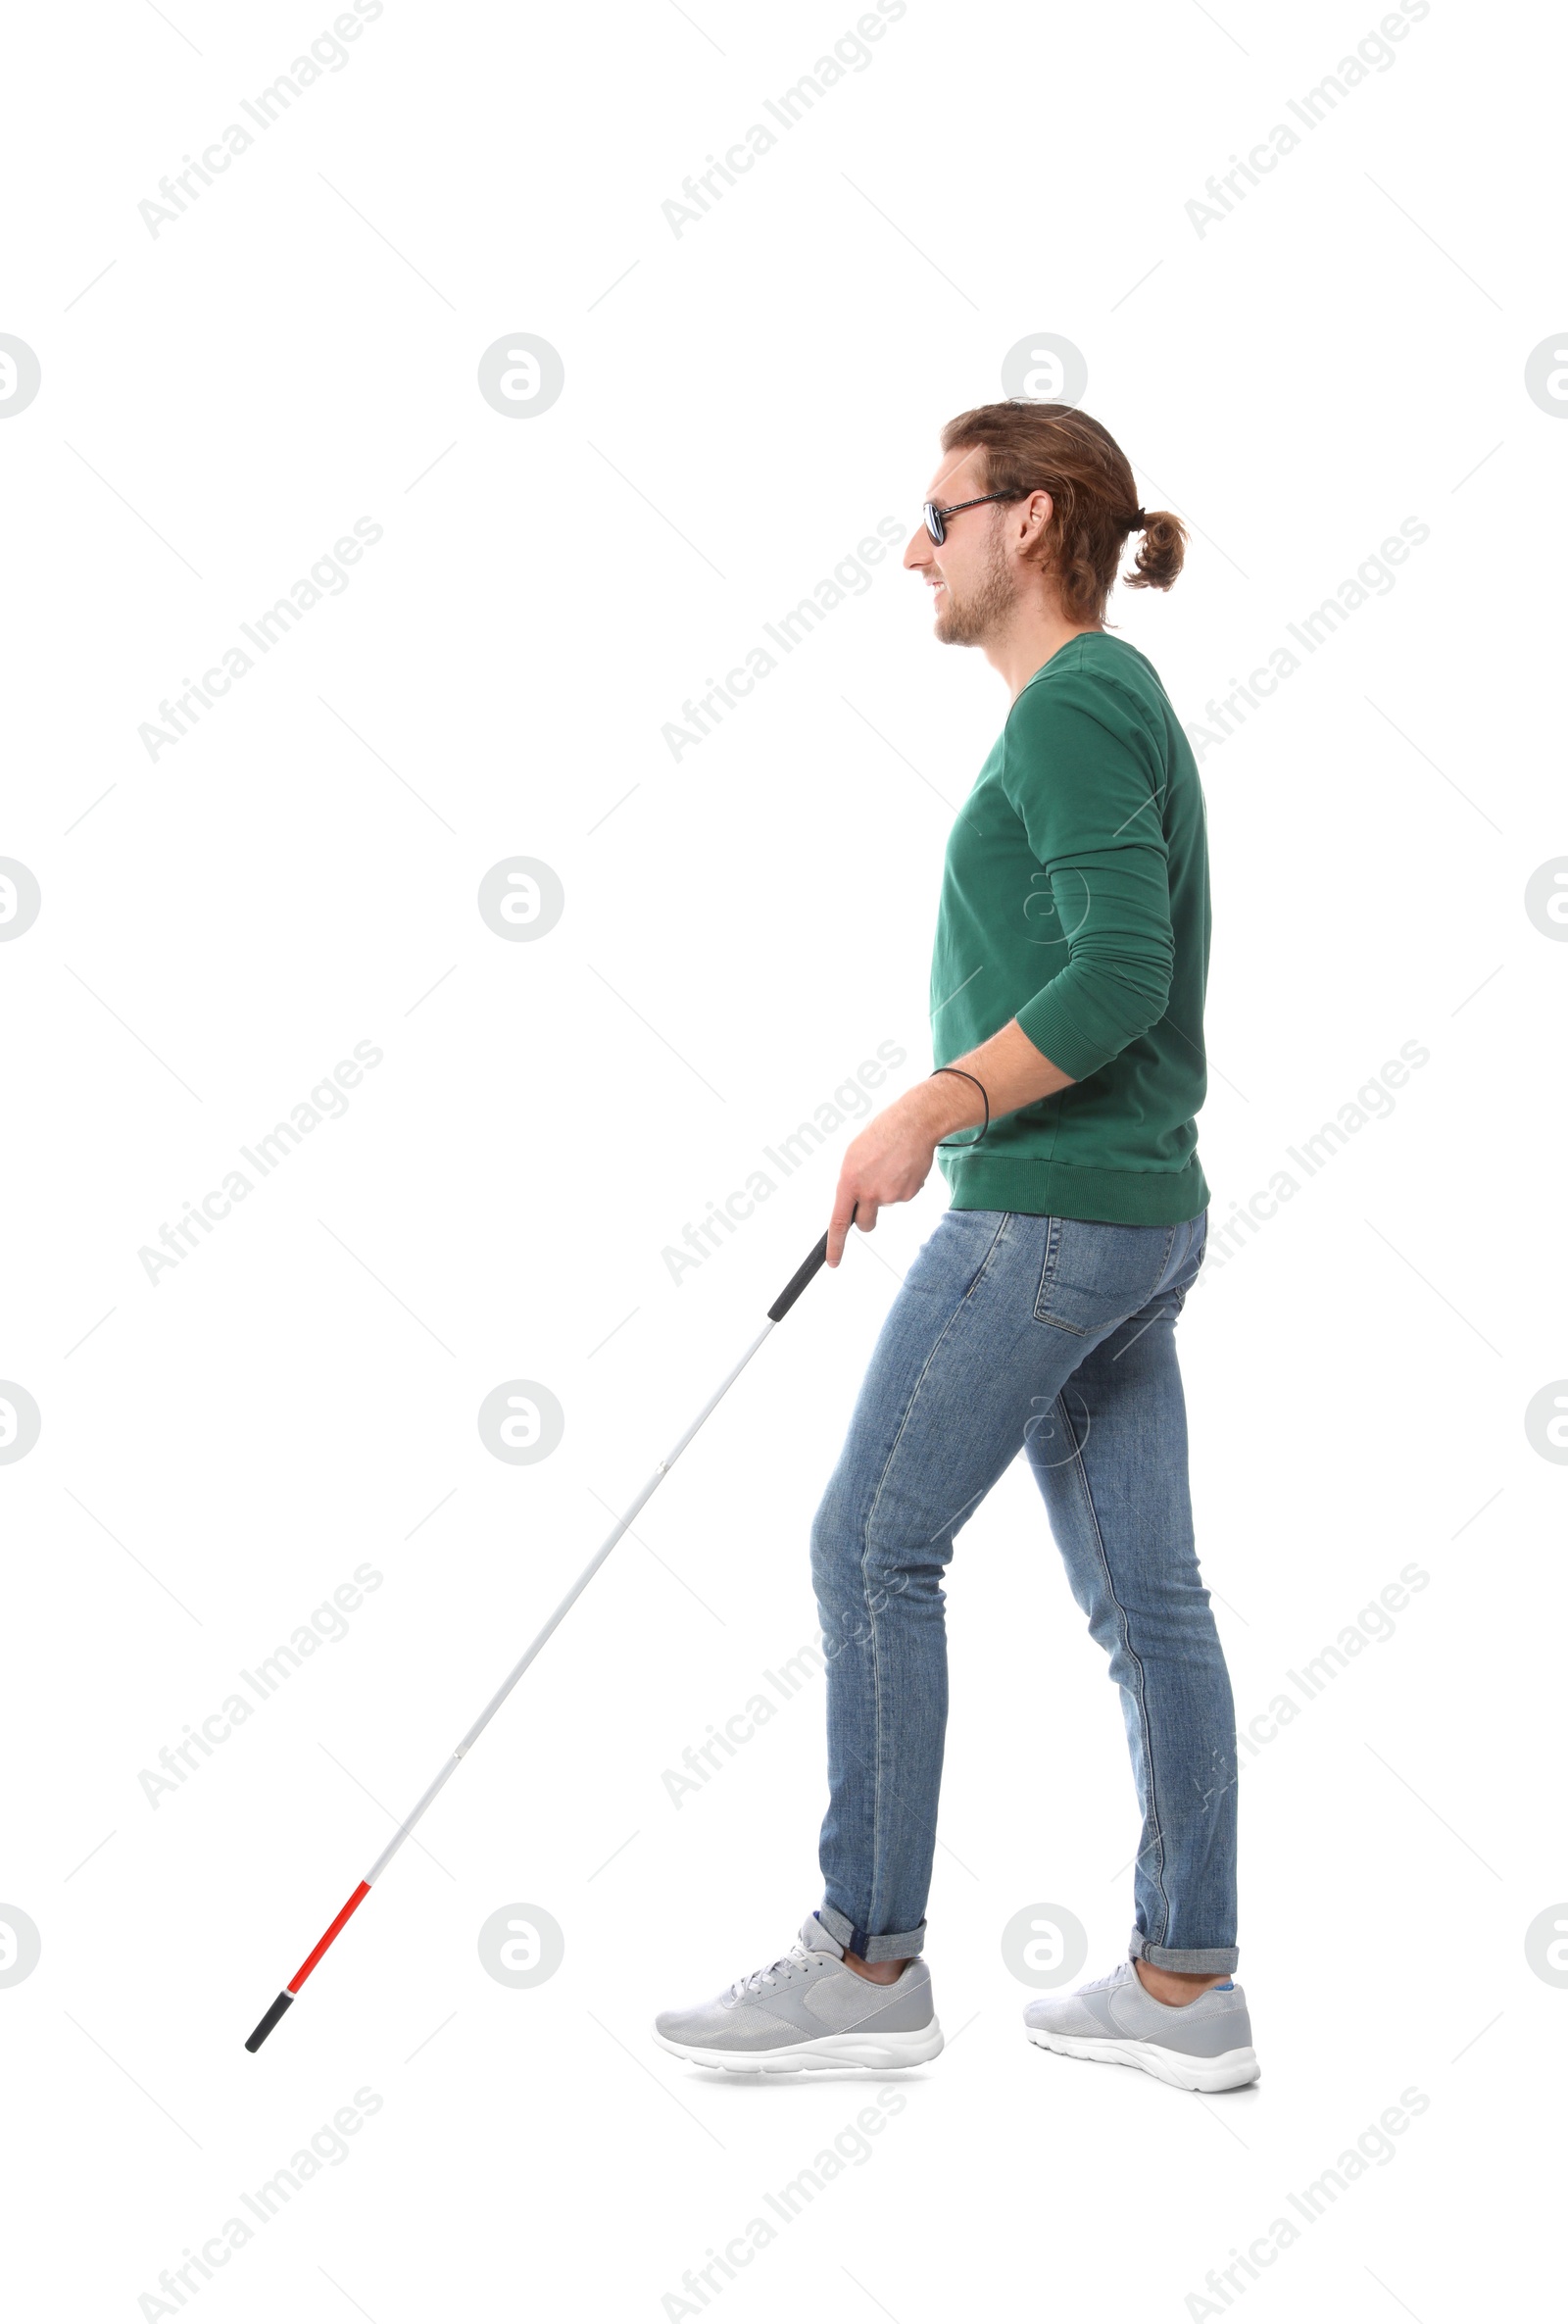 Photo of Blind man in dark glasses with walking cane on white background